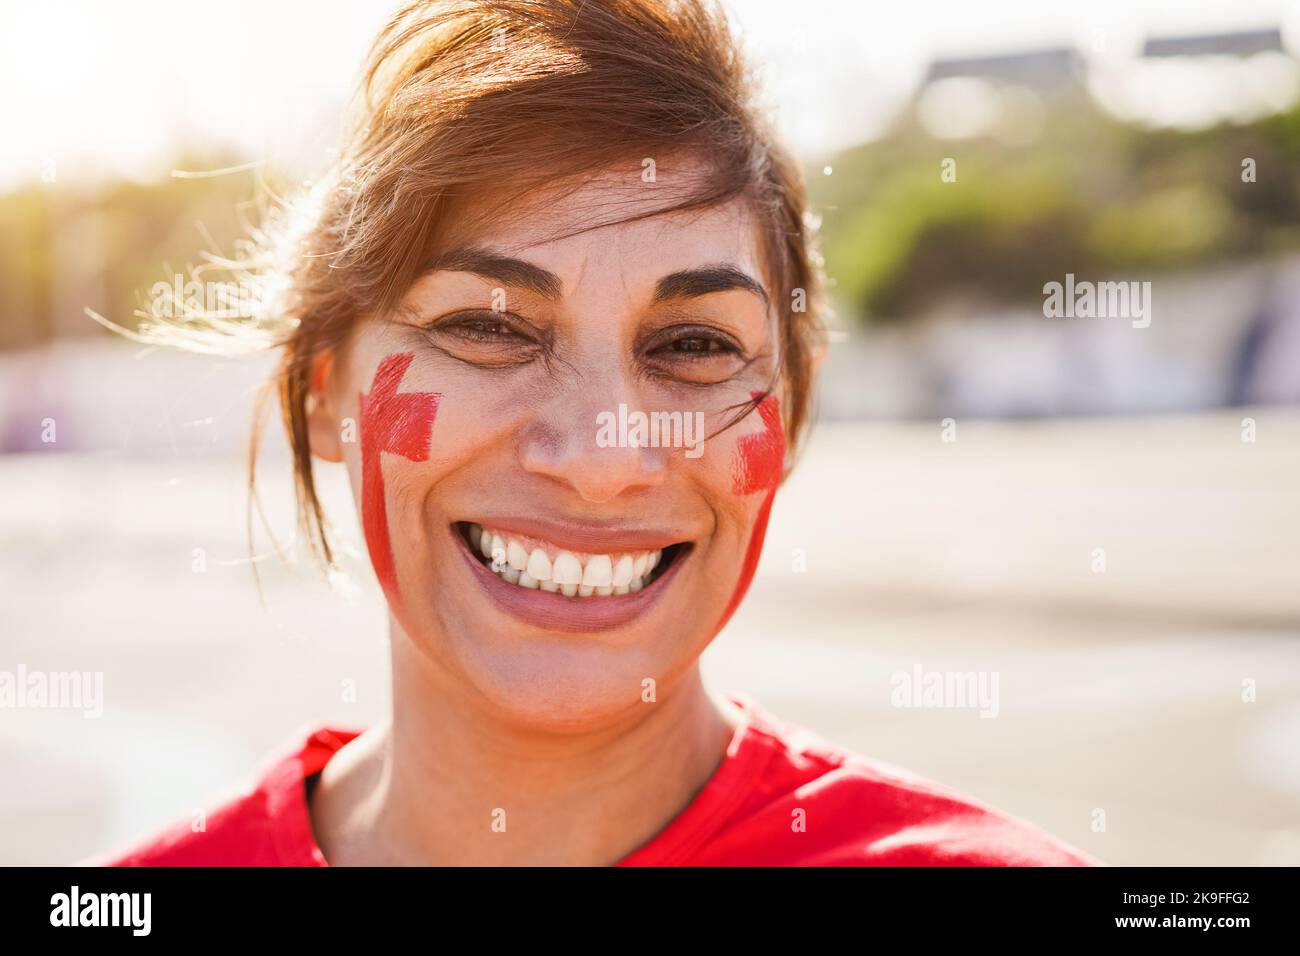 Red mature sport fan laughing out of the stadium before football match - Focus on left eye Stock Photo